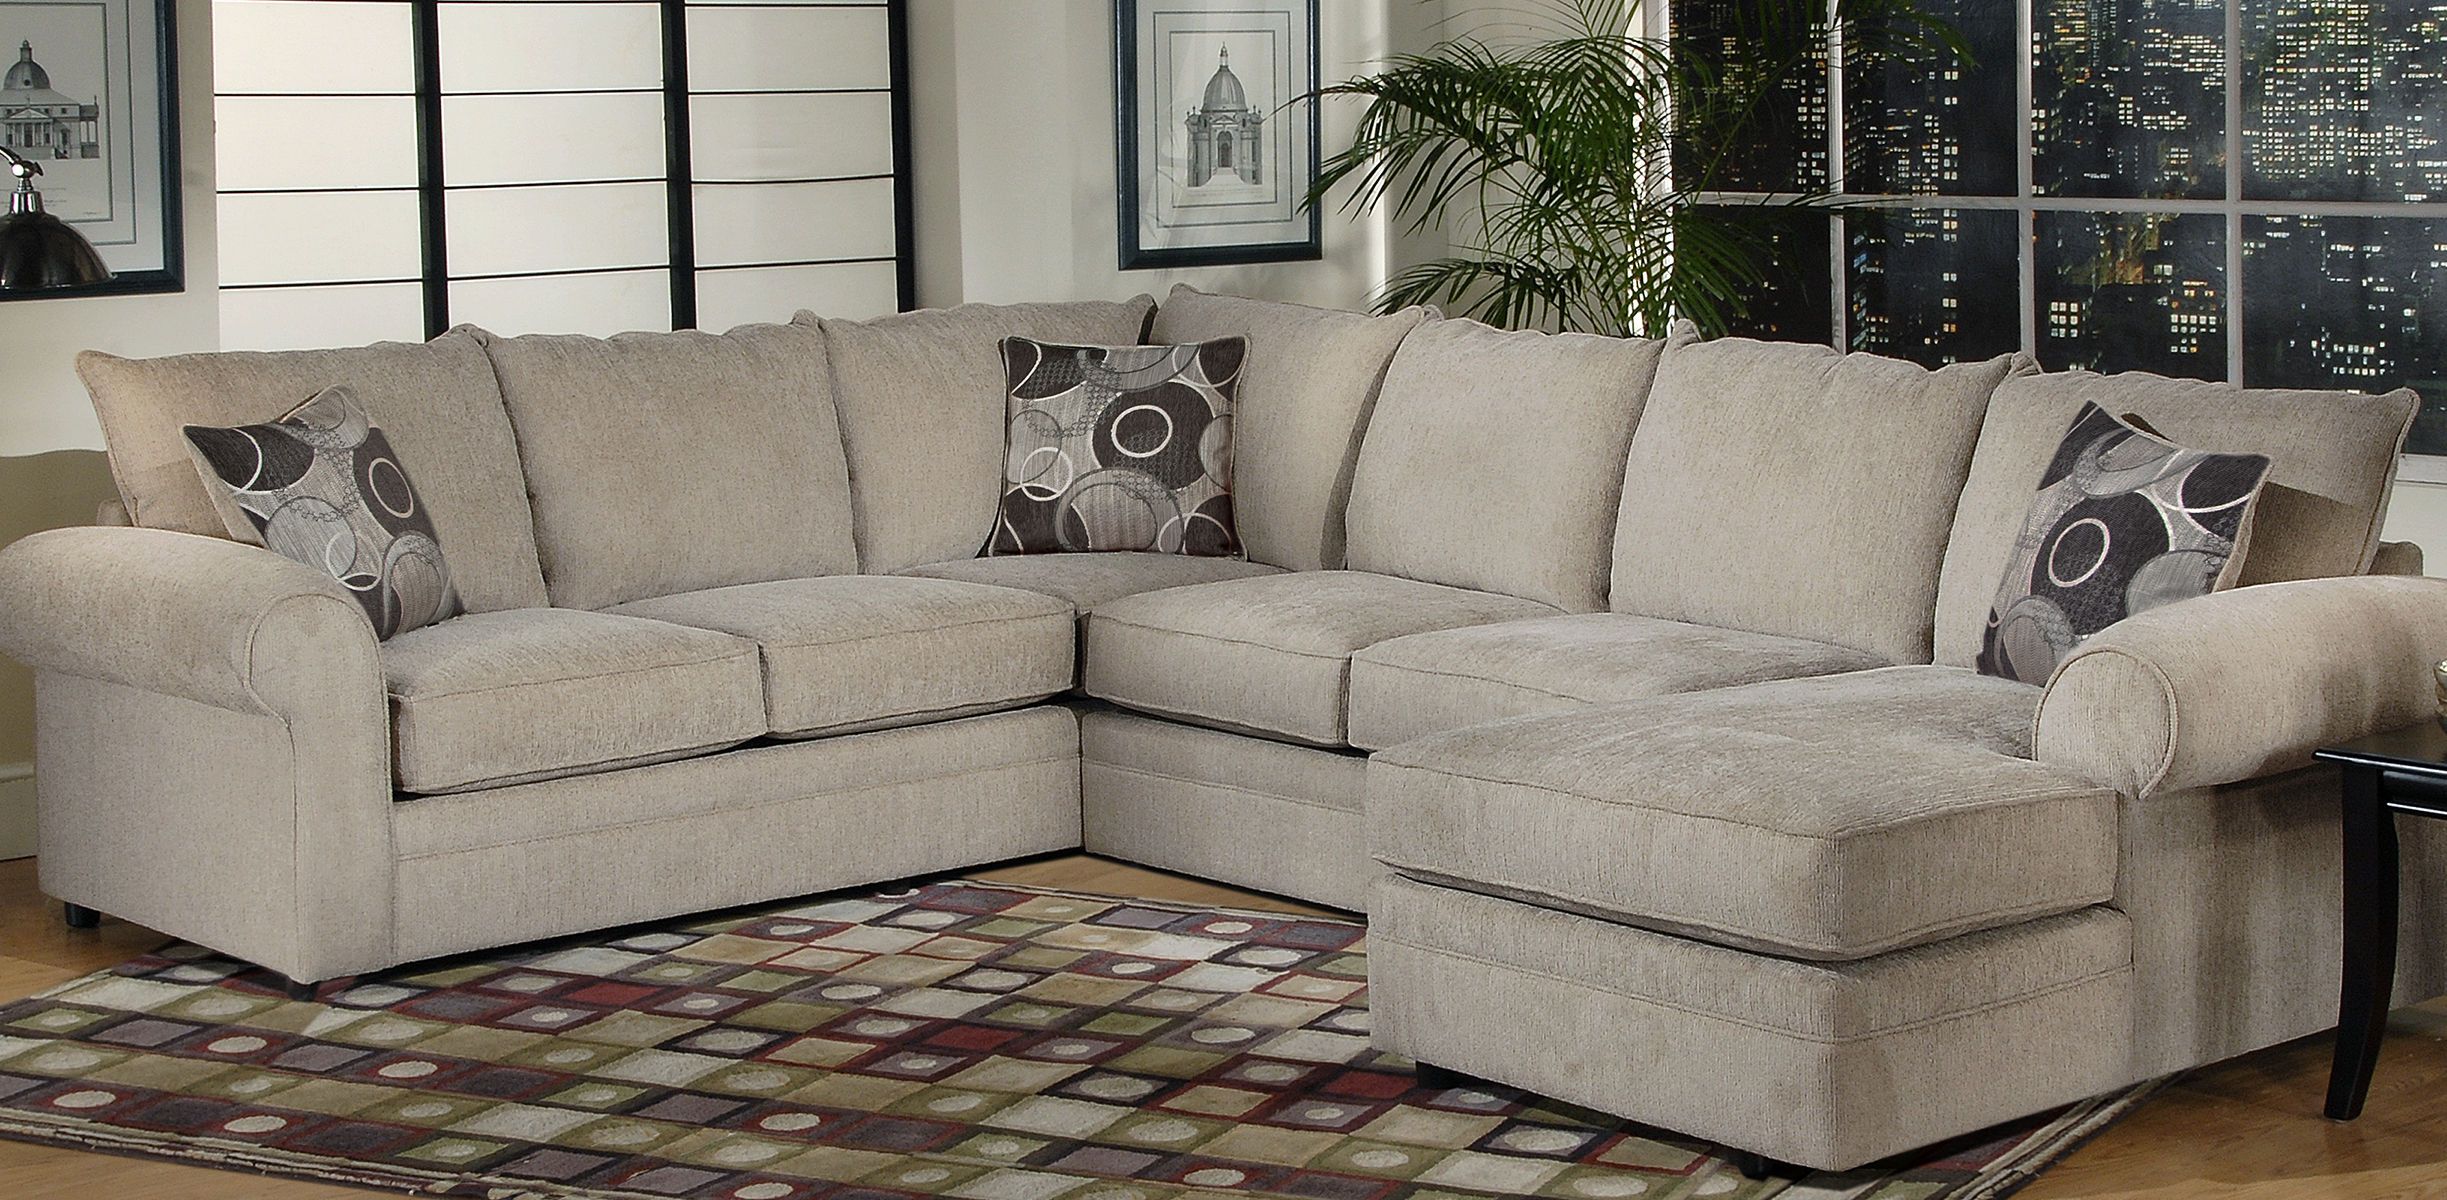 Serta Upholstery Sectionals: Ashas Spiritual Essence Pertaining To Harmon Roll Arm Sectional Sofas (Photo 1 of 15)